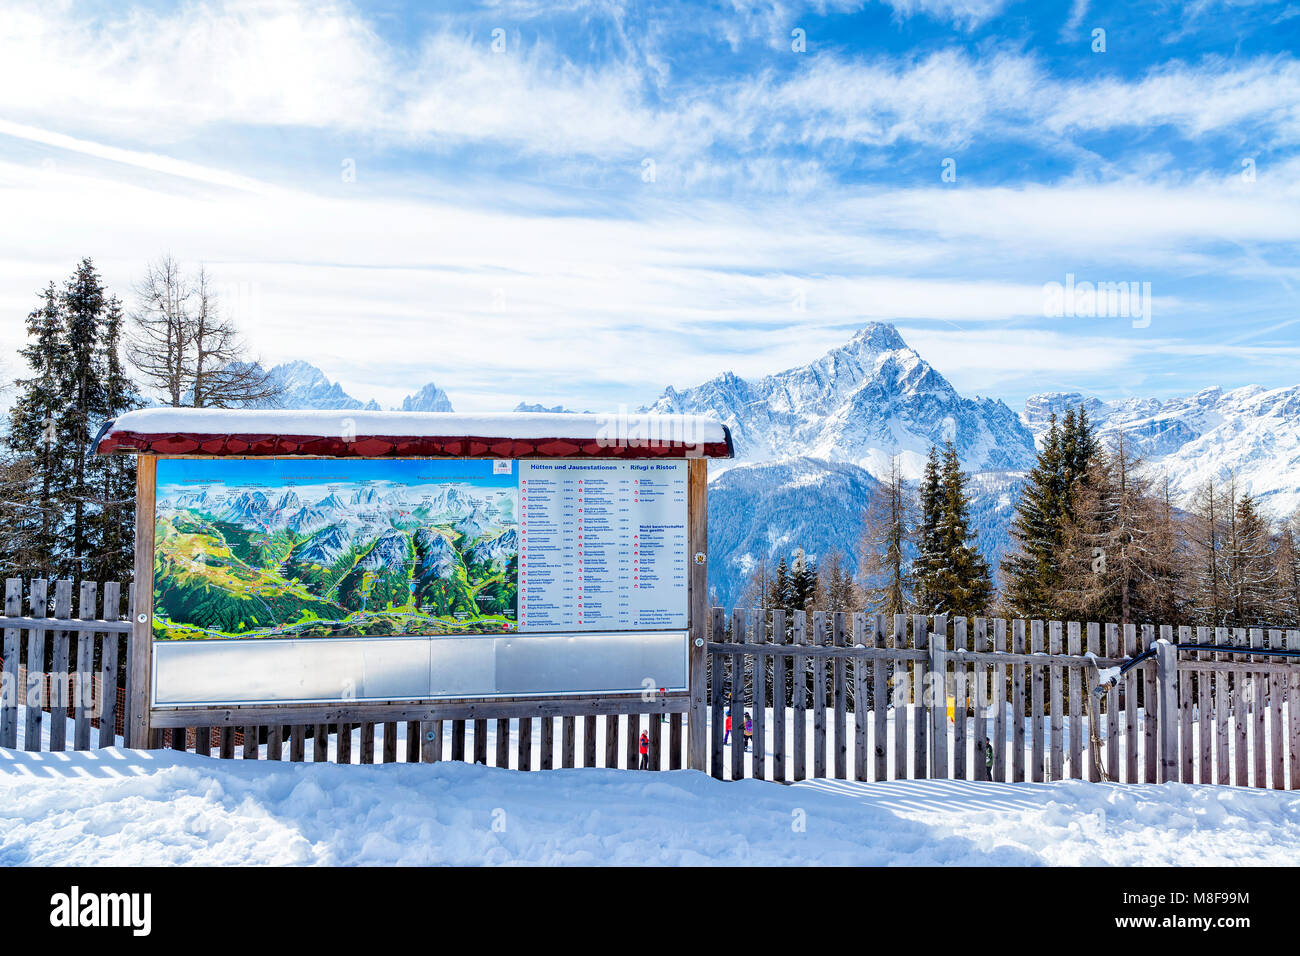 Information sign and map of the Dolomiti with Trentino Alto Adige's peaks in the background, San Candido. Italy Stock Photo